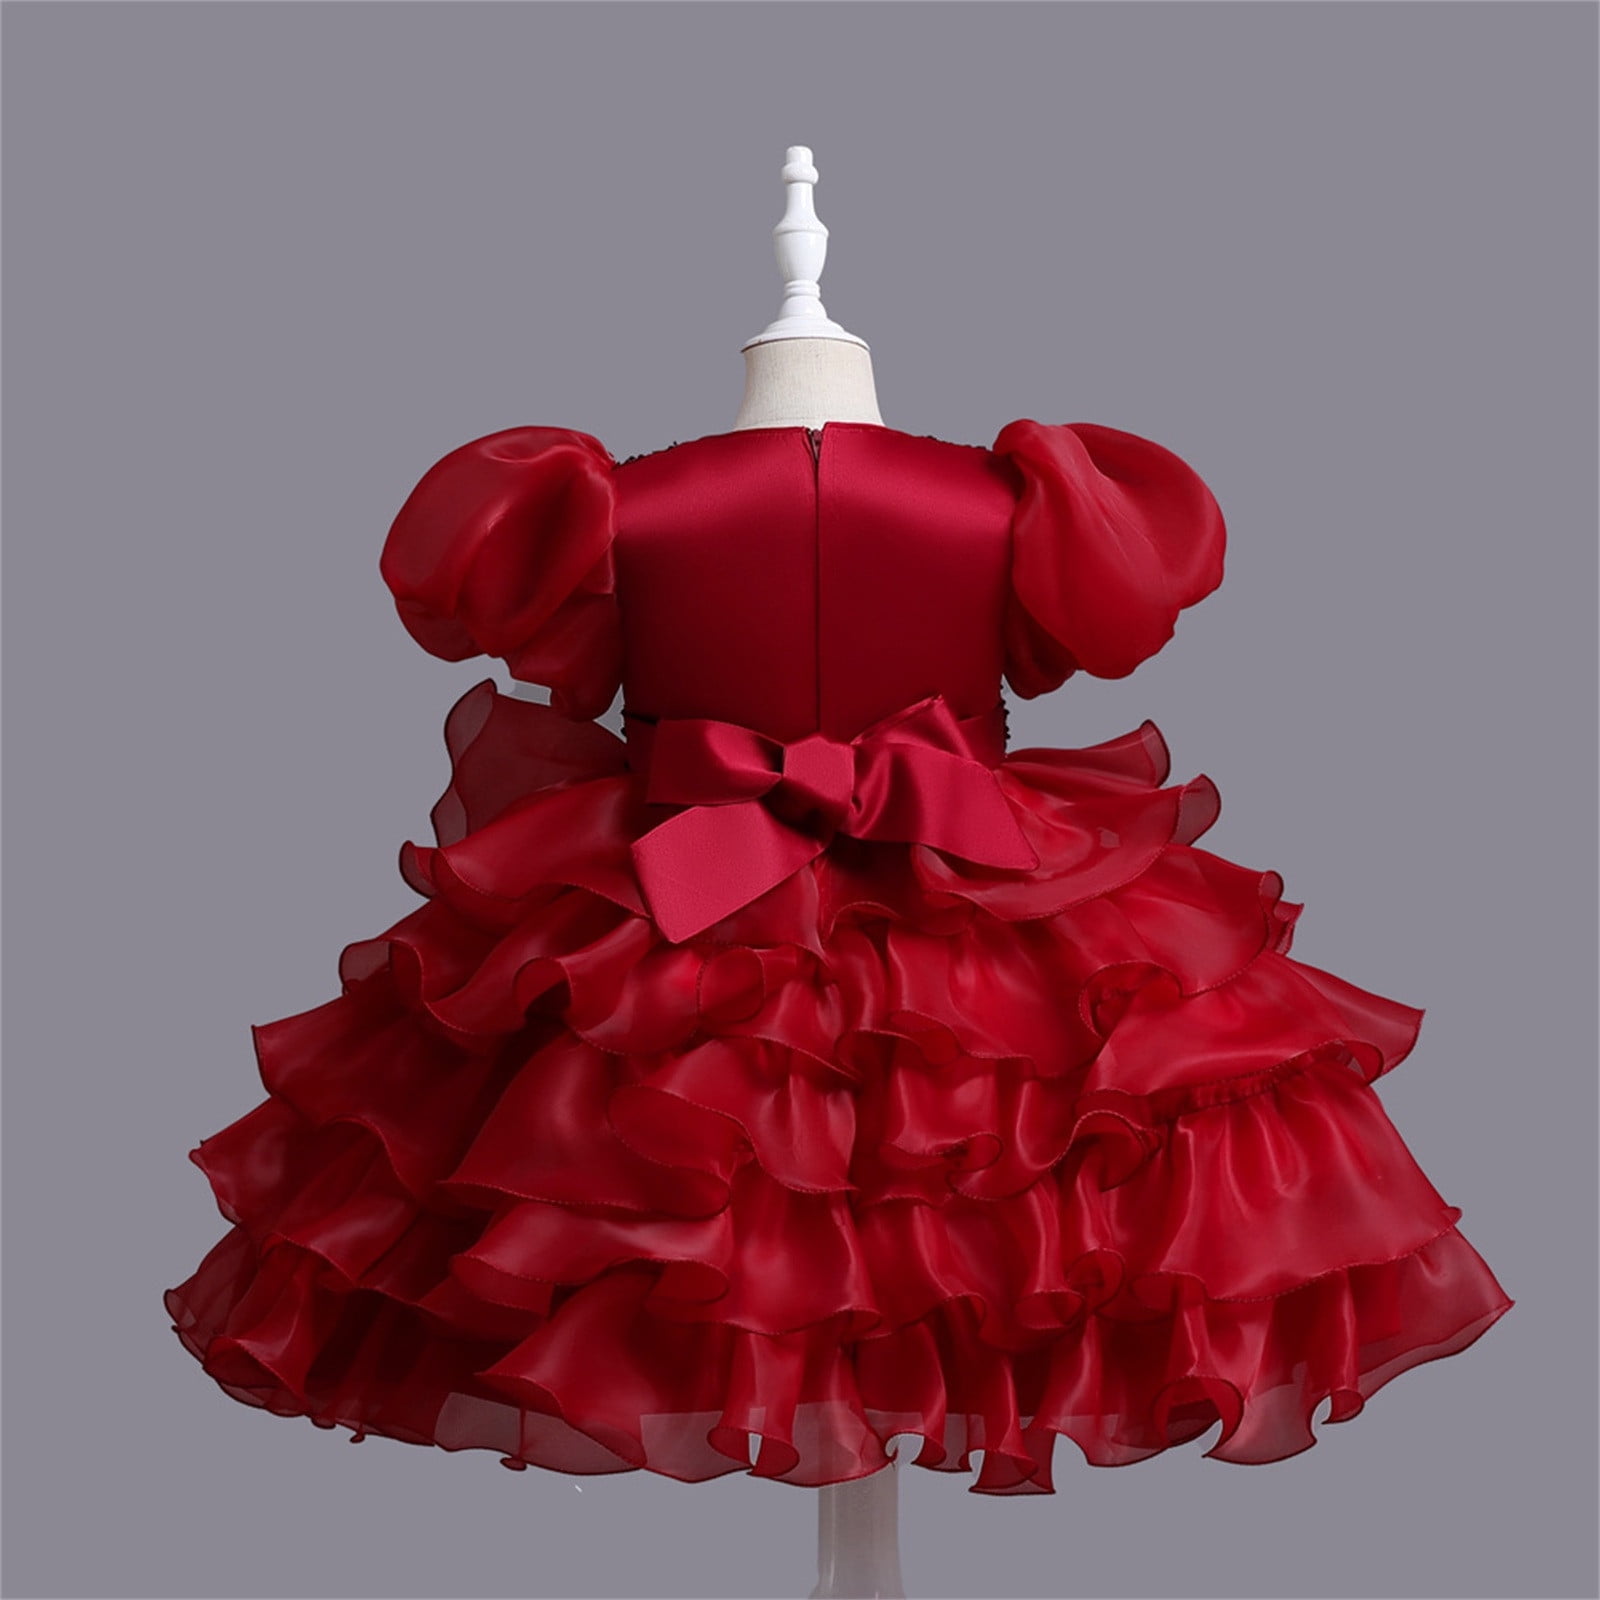 Kid's Party Wear Dress - Cute Fashion Kids Girls Baby Princess Popcorn Net  Party Wear Flower Dresses Clothes 3 Months to 7 Years Material Composition:  Net Material: Popcorn Net (This Soft Dress